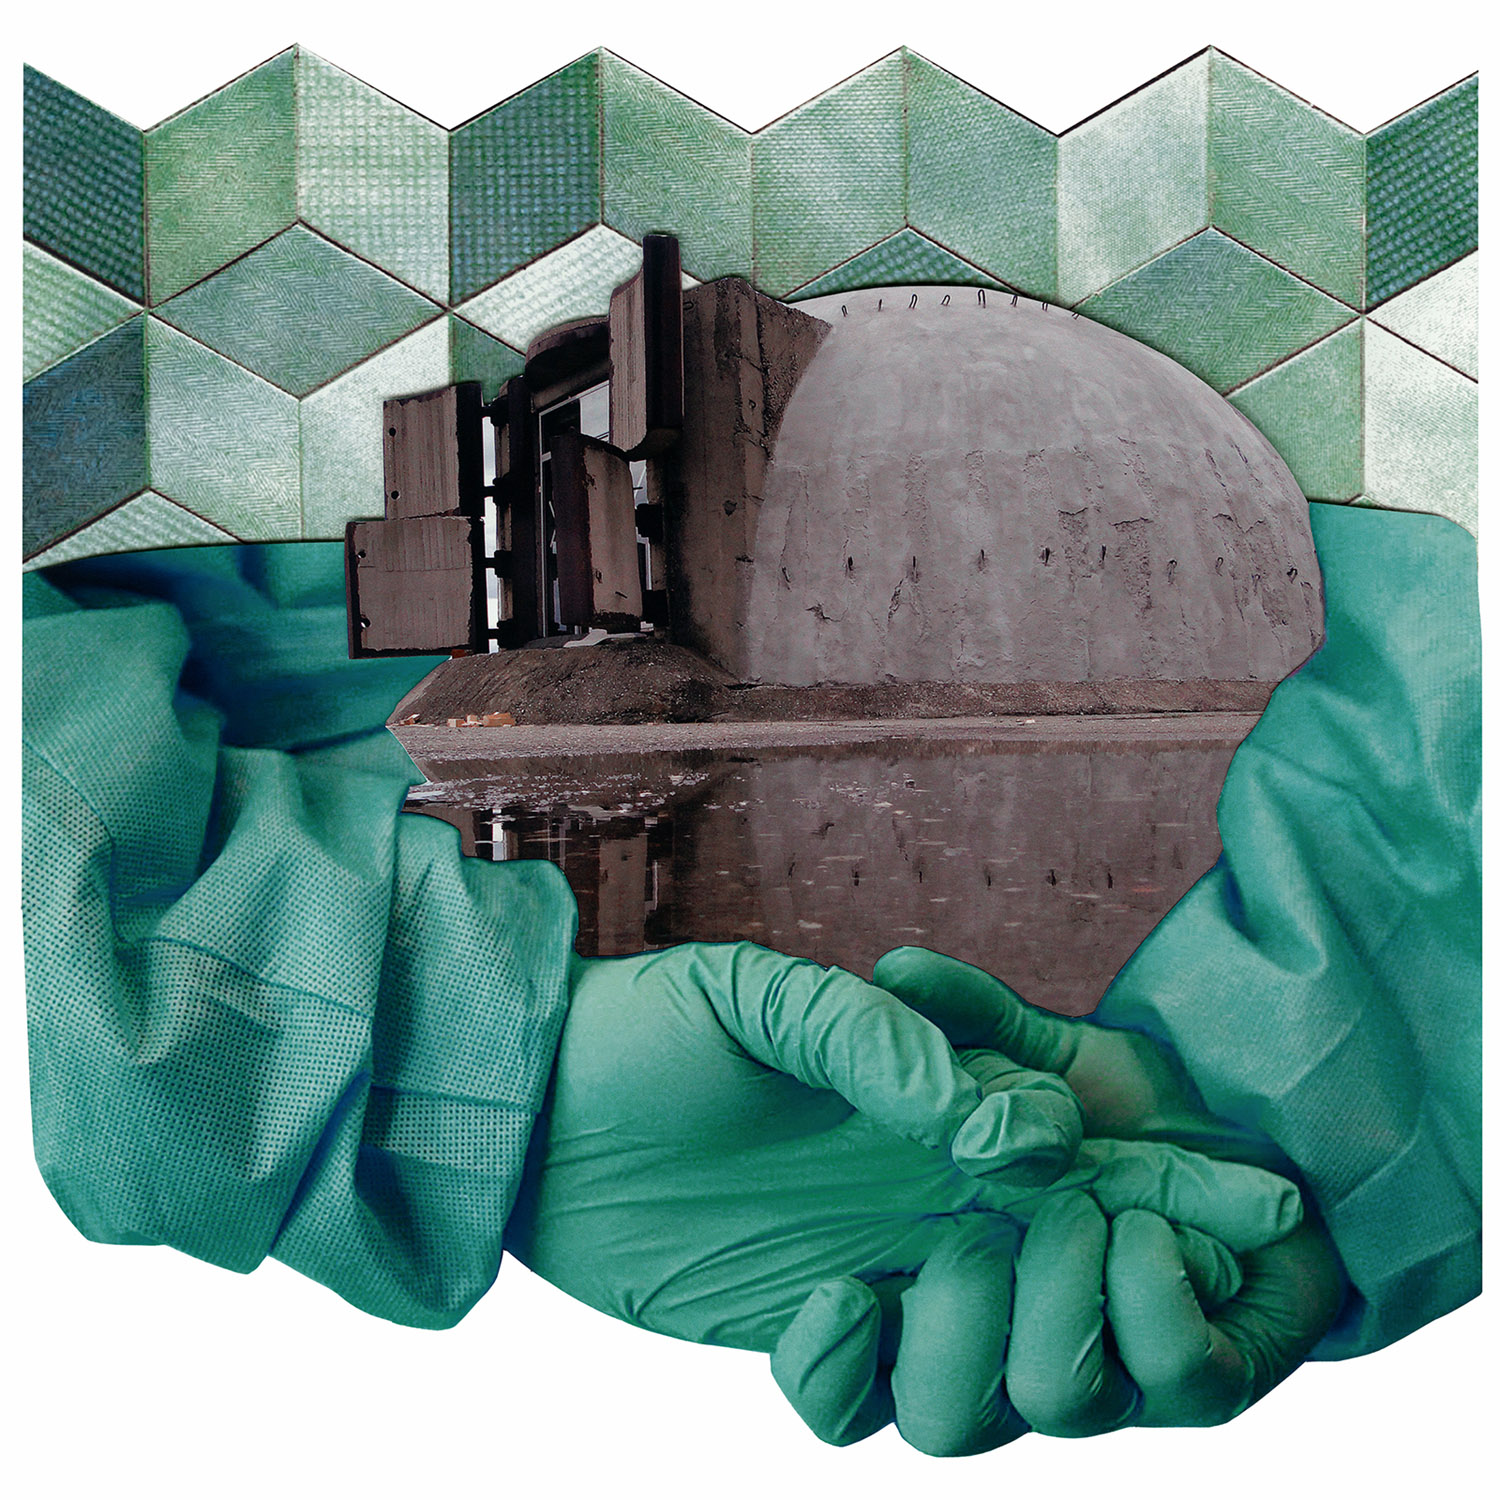 Color photographic collage containing green-gloved hands cradling a black-and-white nuclear power plant dome, itself placed over a green stylized tile background.